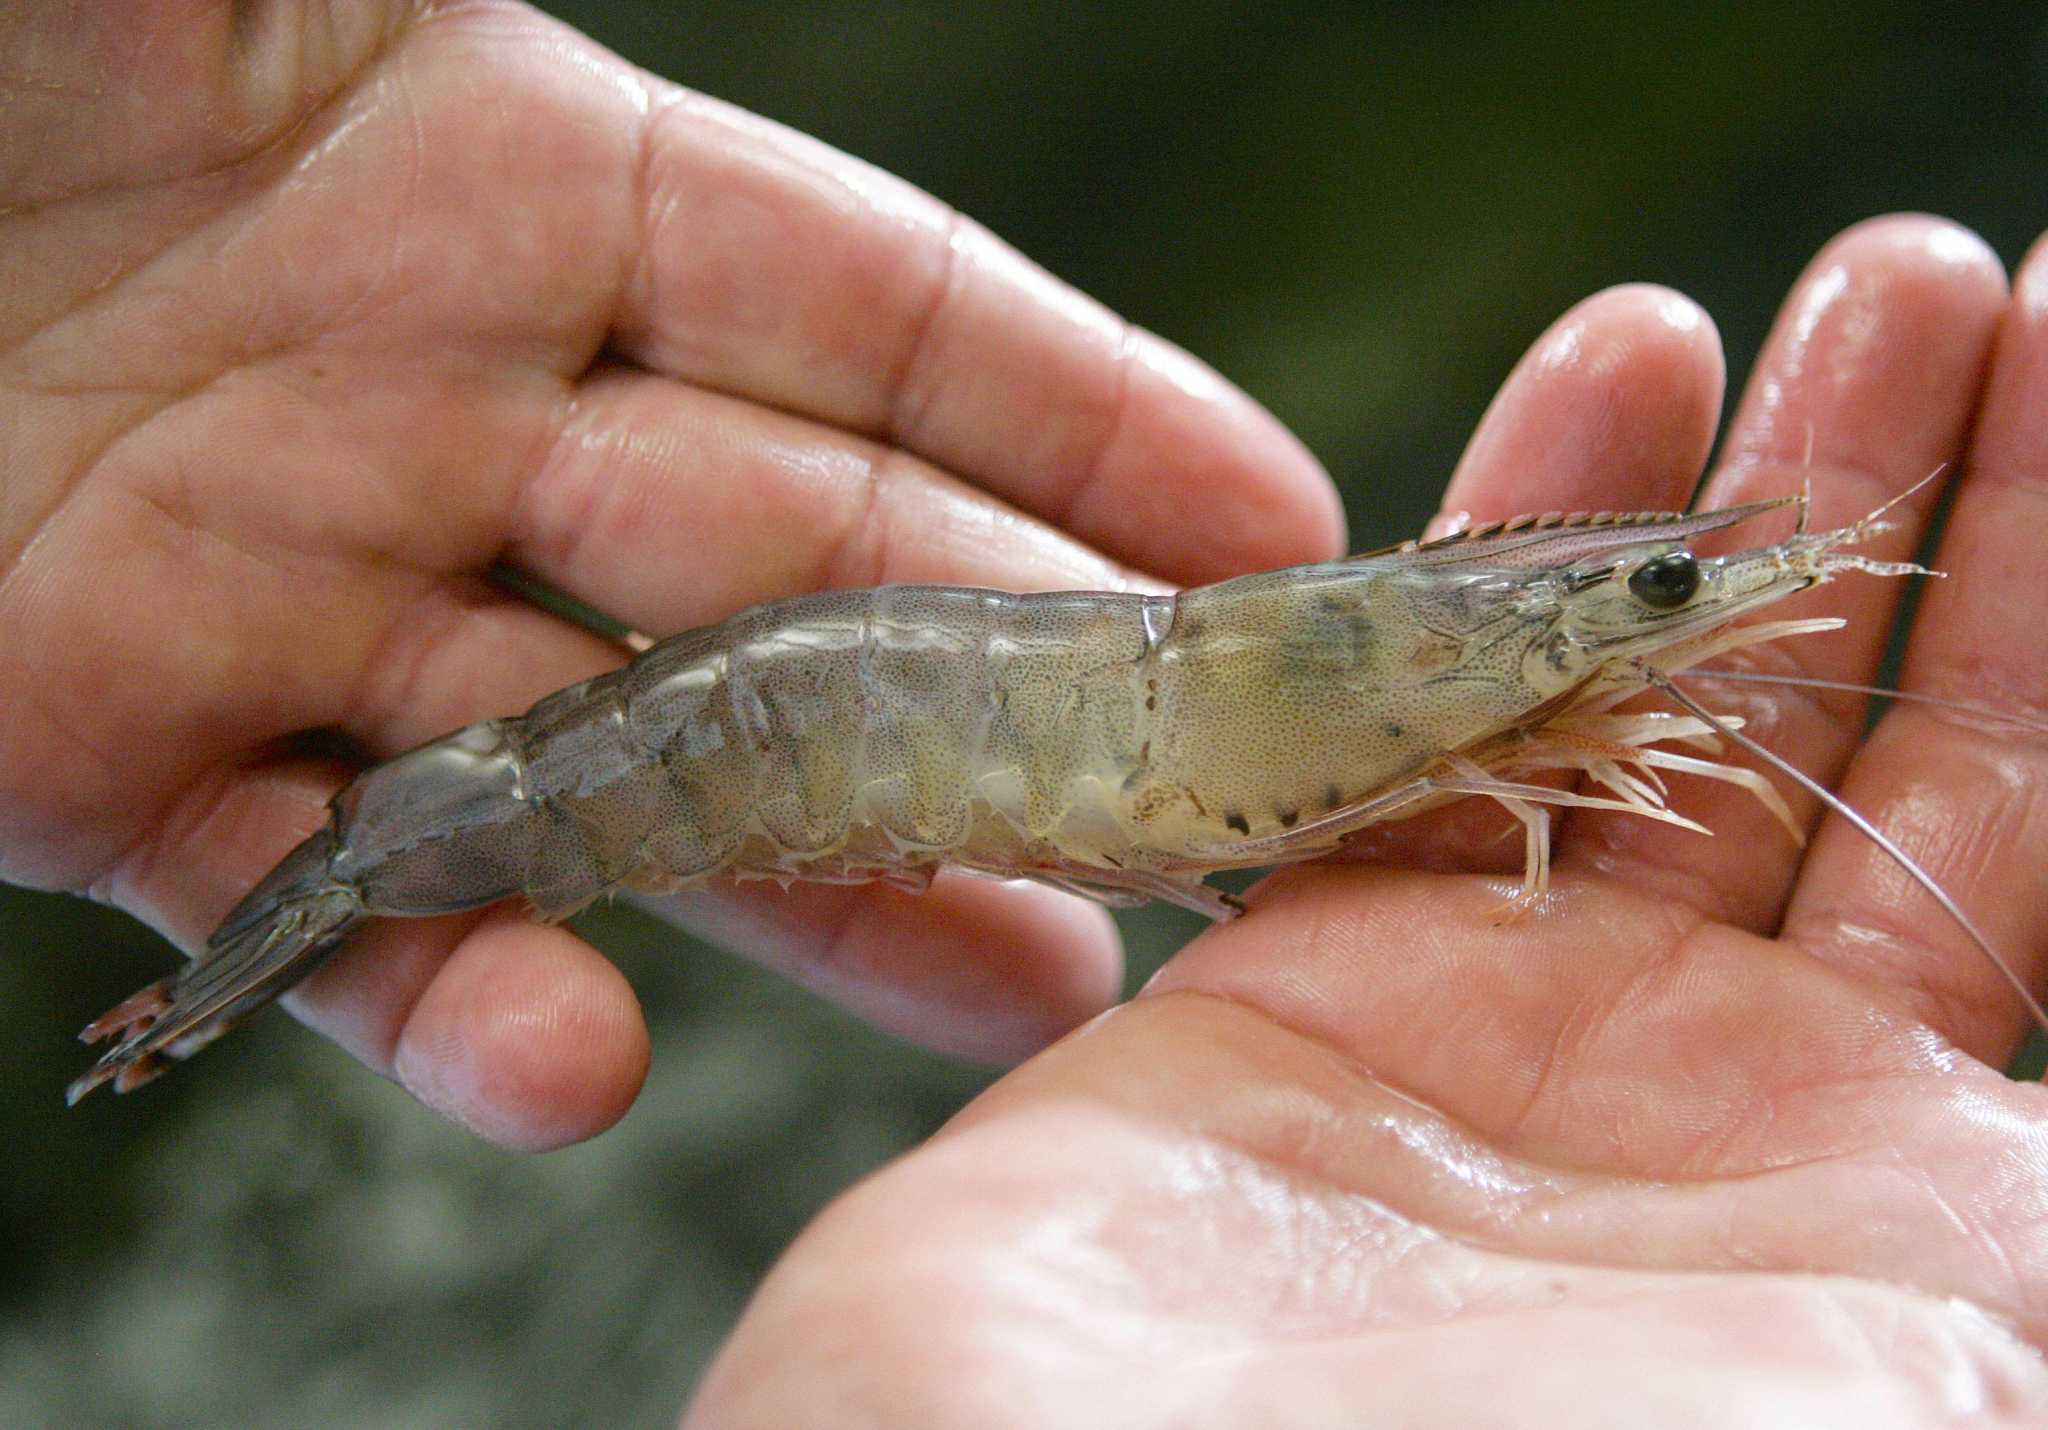 That box of frozen shrimp used for bait could be illegal — and deadly